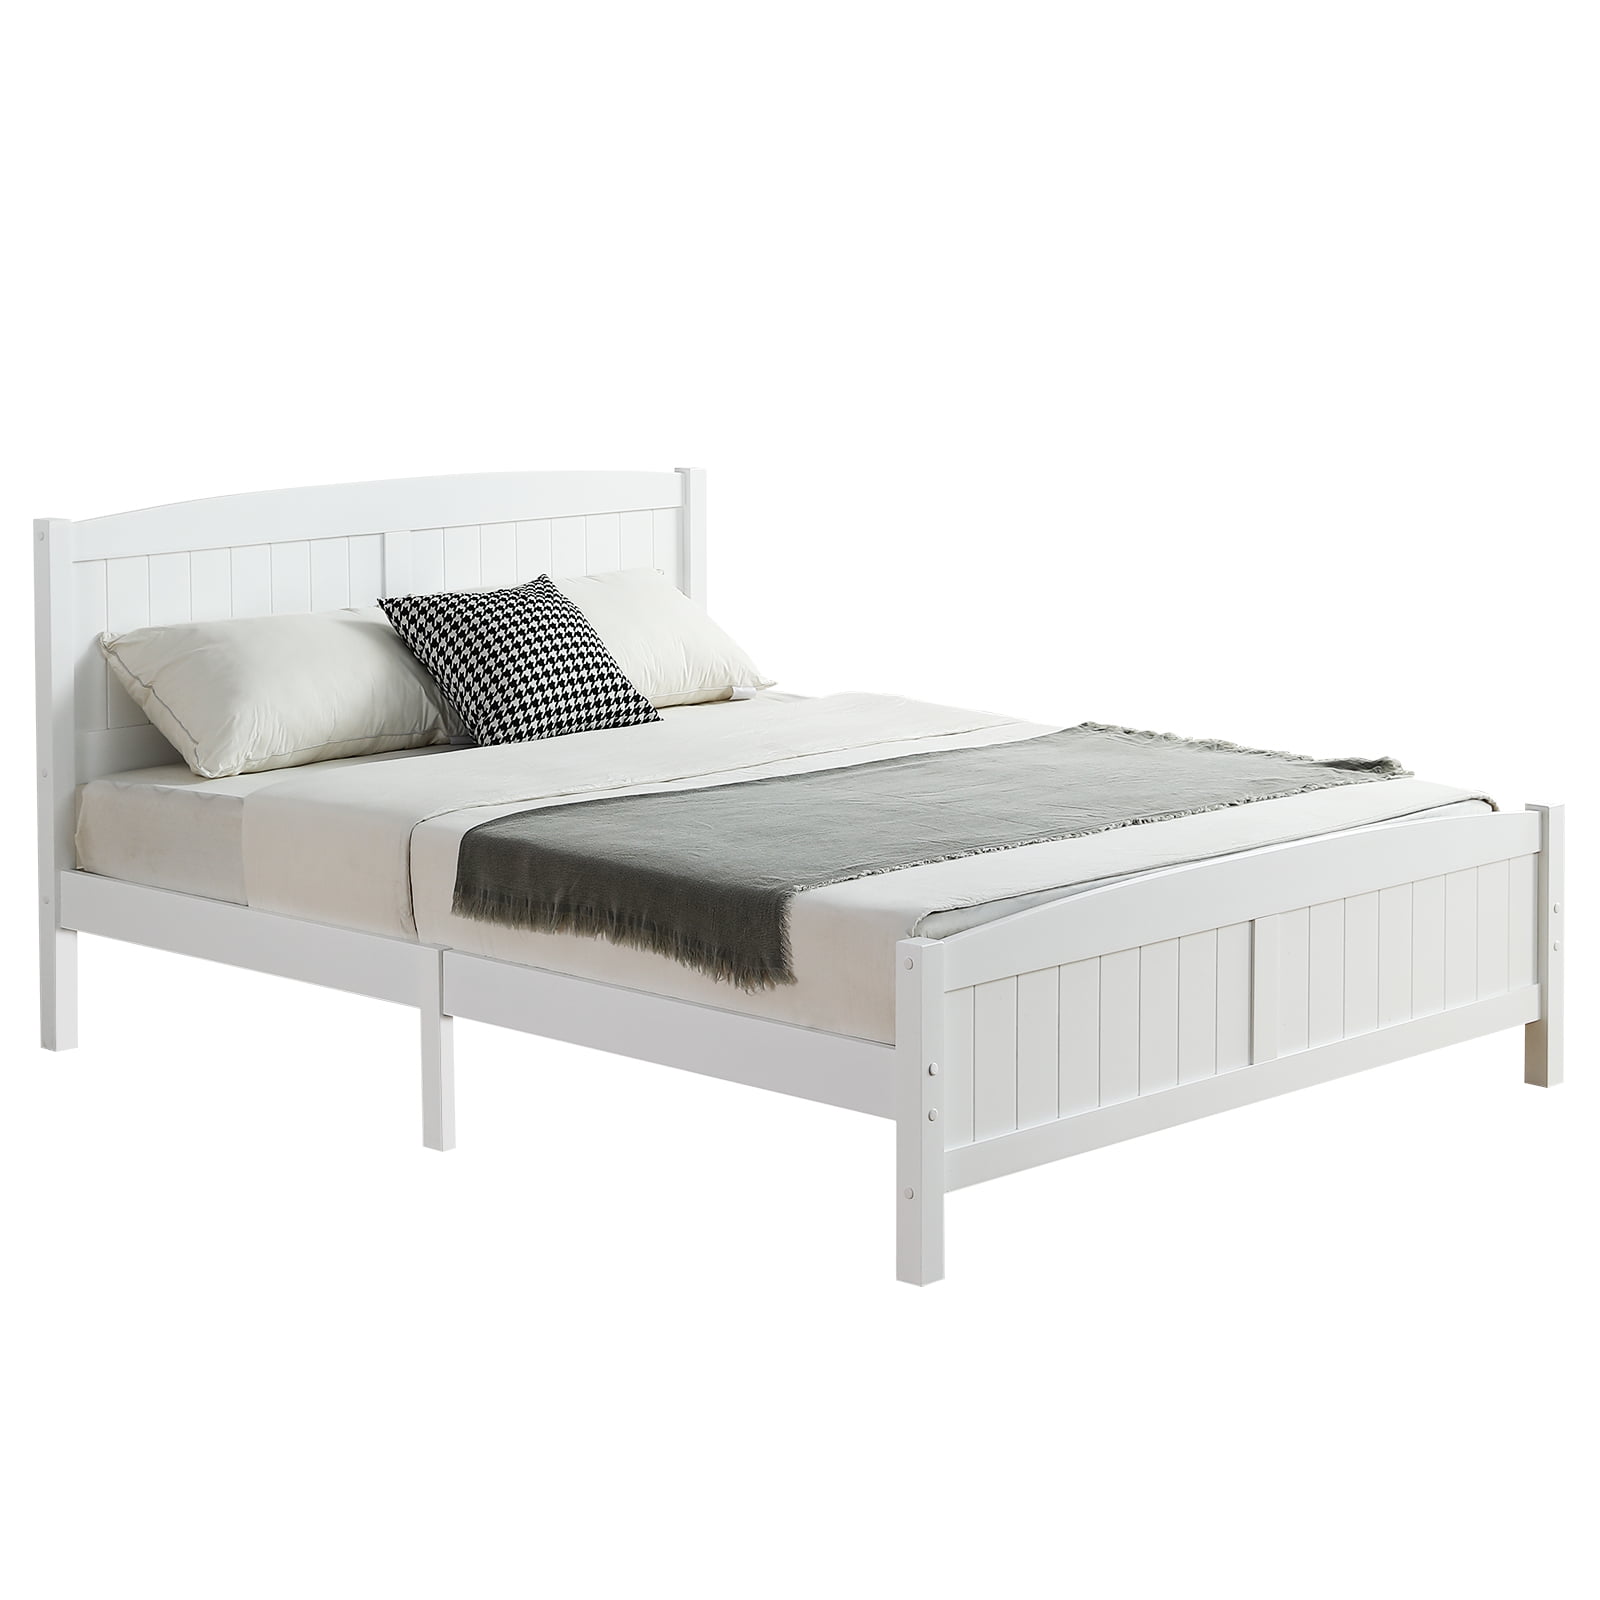 Zimtown Full Platform Bed, Solid Pine Wood Kids Bed Frame with Headboard and Footboard , Easy Assembly, White